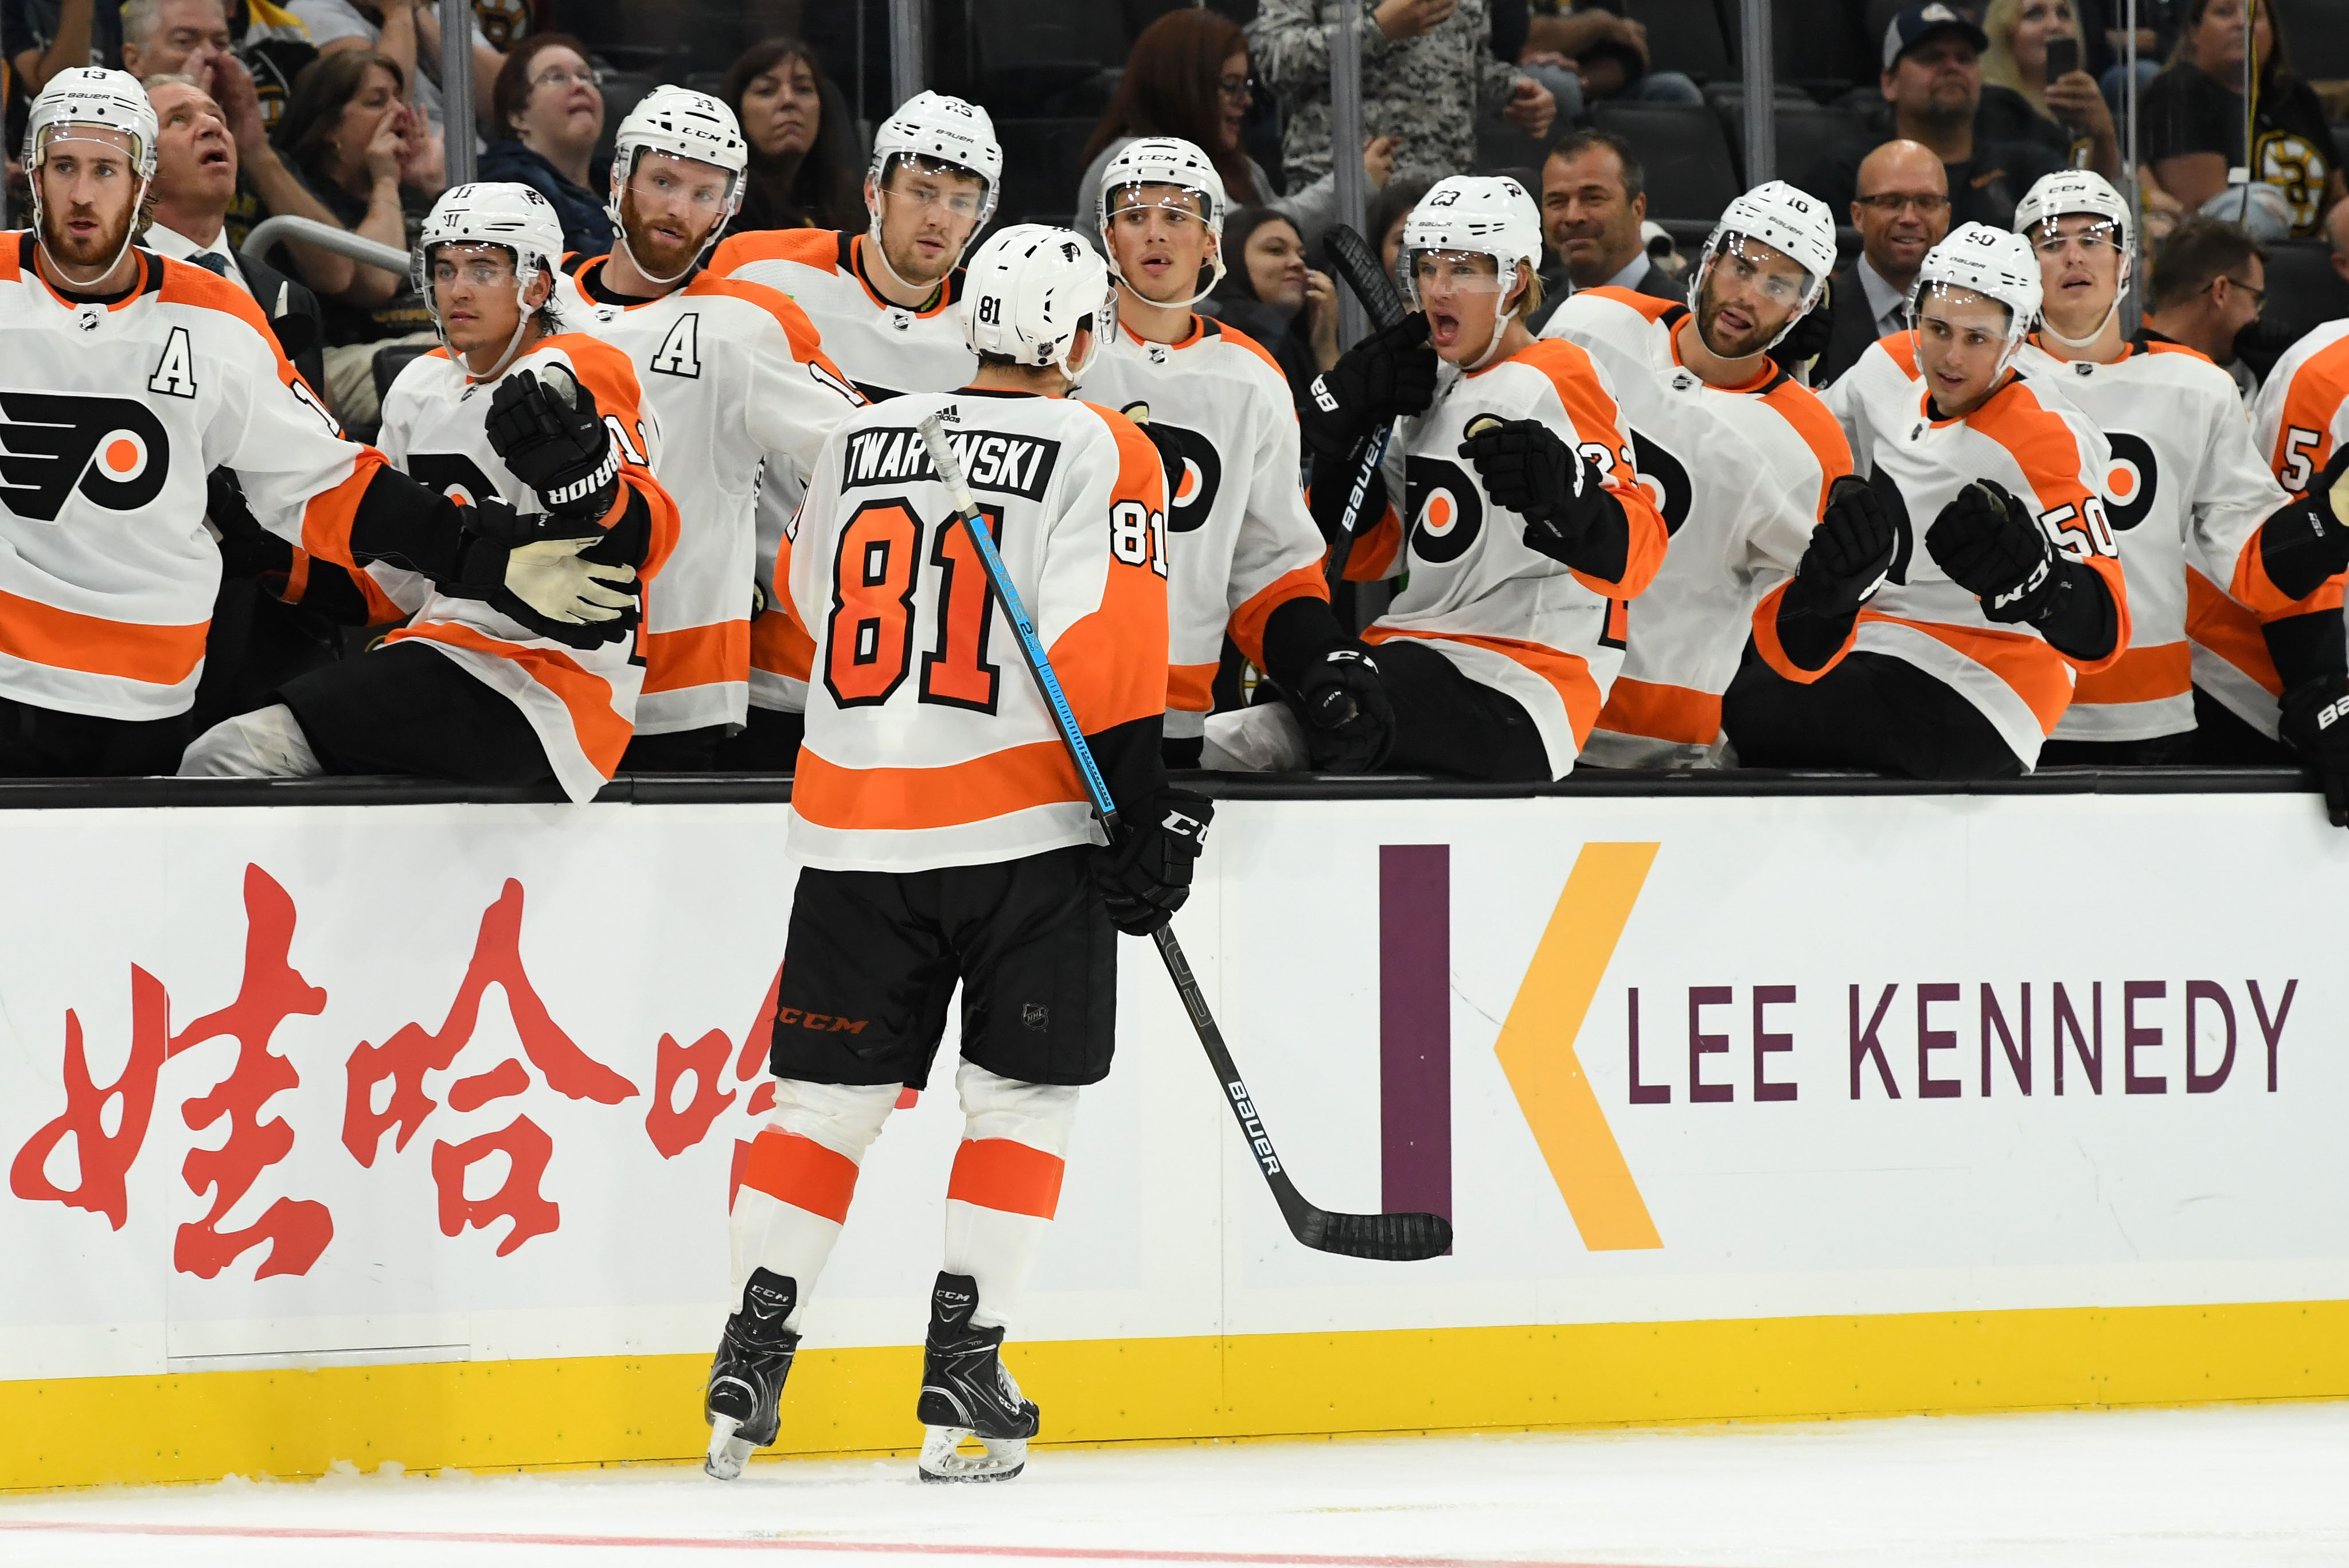 Flyers show off first new uniforms in 13 years - CBS Philadelphia